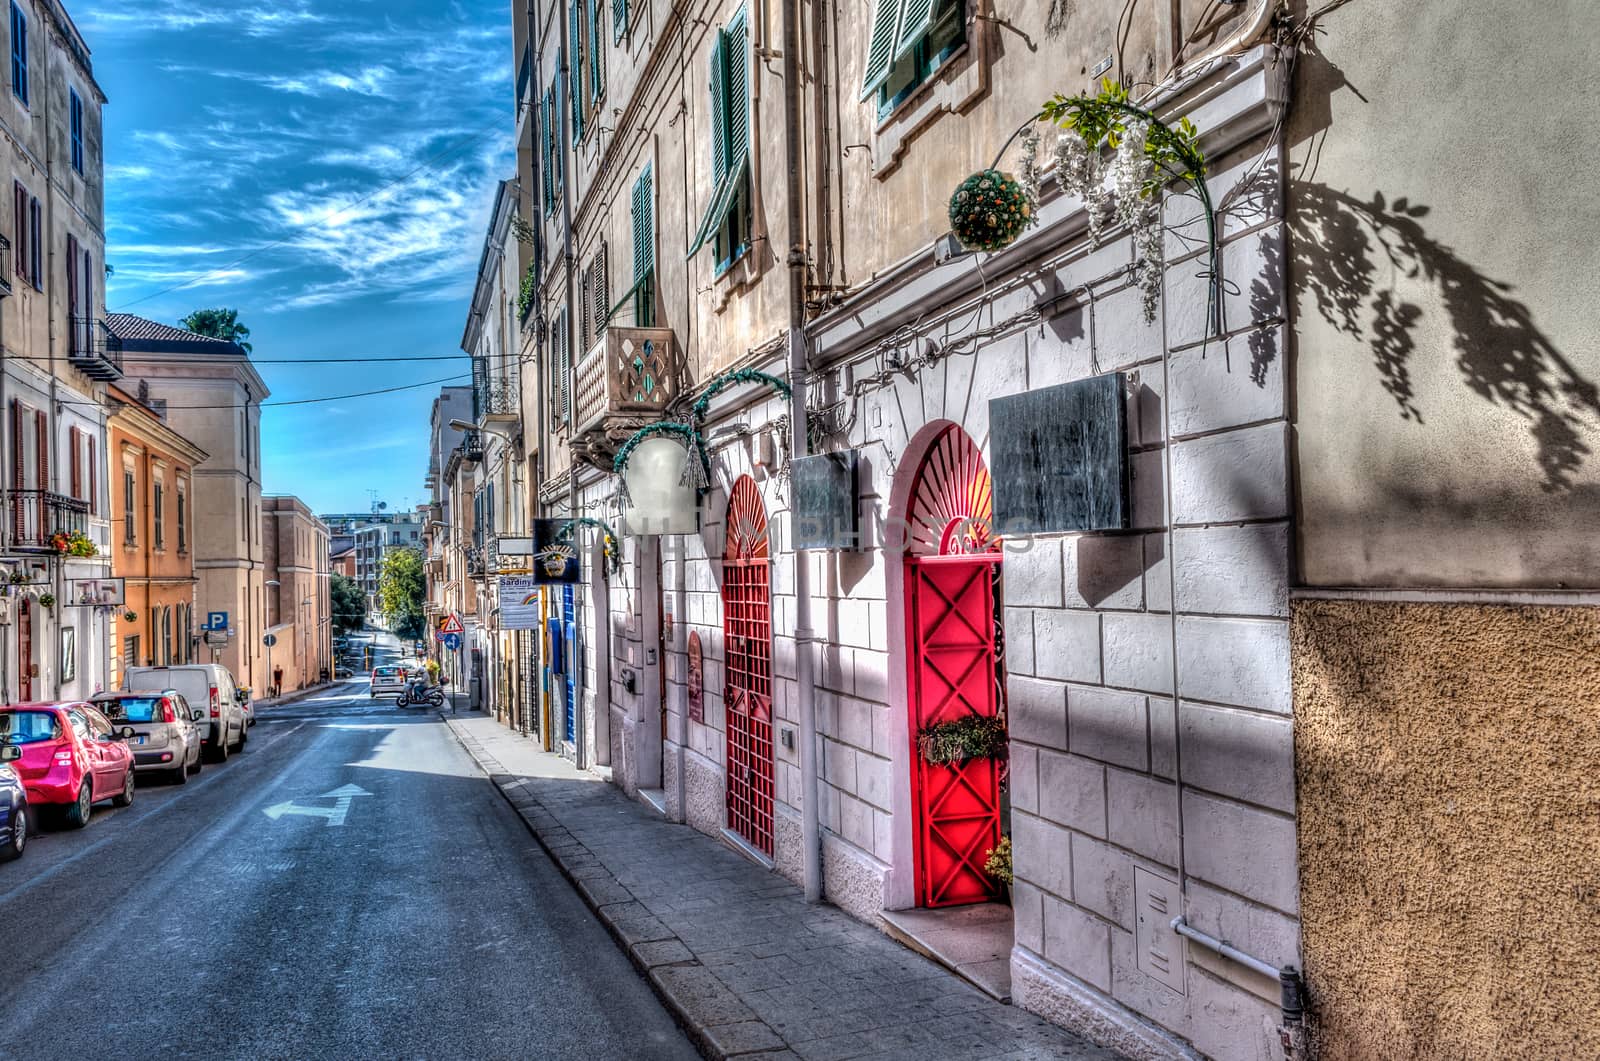 view of alley in little old european city in a sunny day in hdr - Sassari - Sardinia